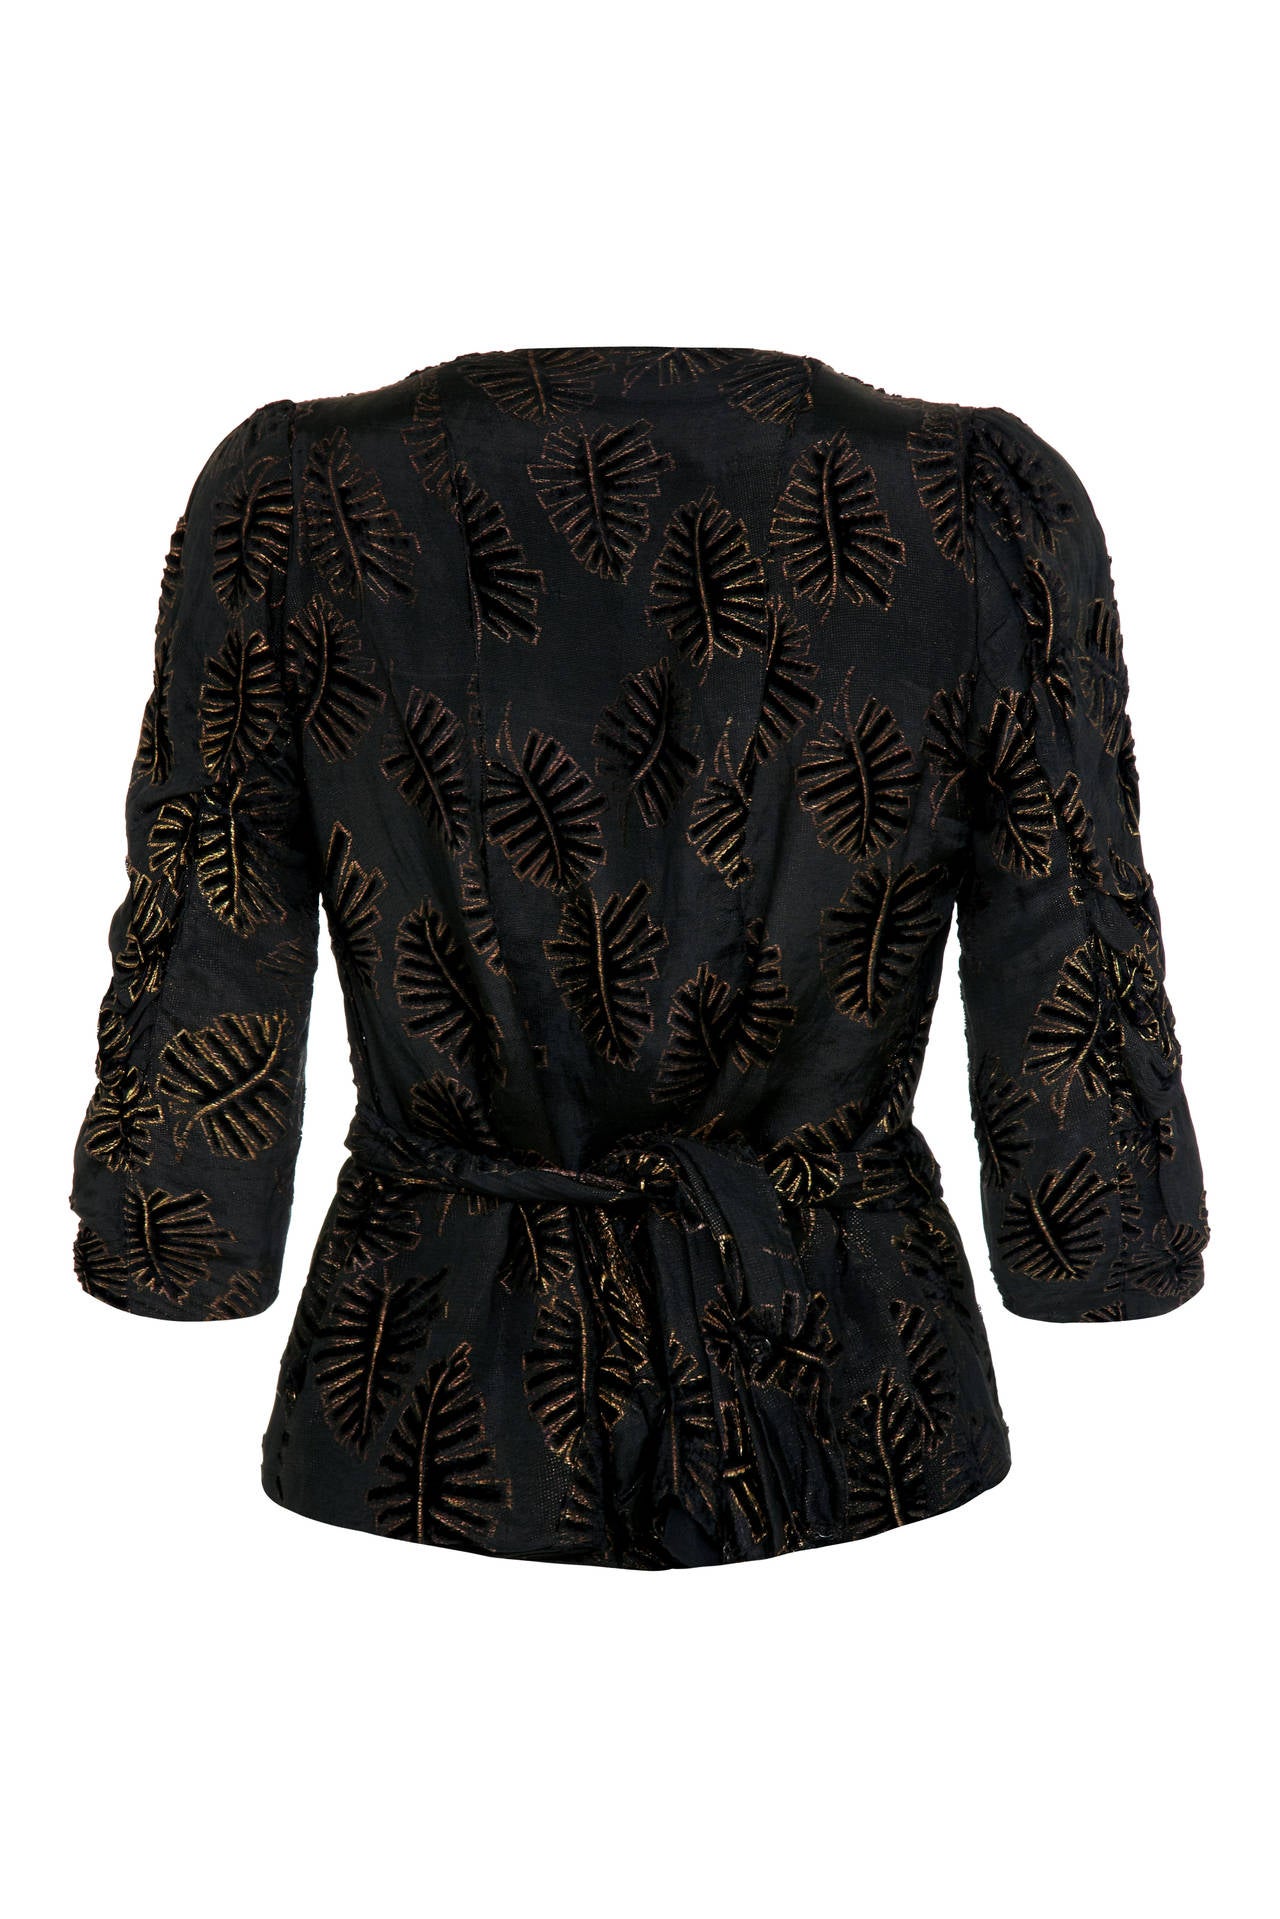 This incredible black and gold lame woven top with embossed black velvet leaf pattern is a beautiful example of 1930s occasion wear but could just as easily be worn over jeans such is the versatility of the piece.  Featuring ¾ sleeves and pretty